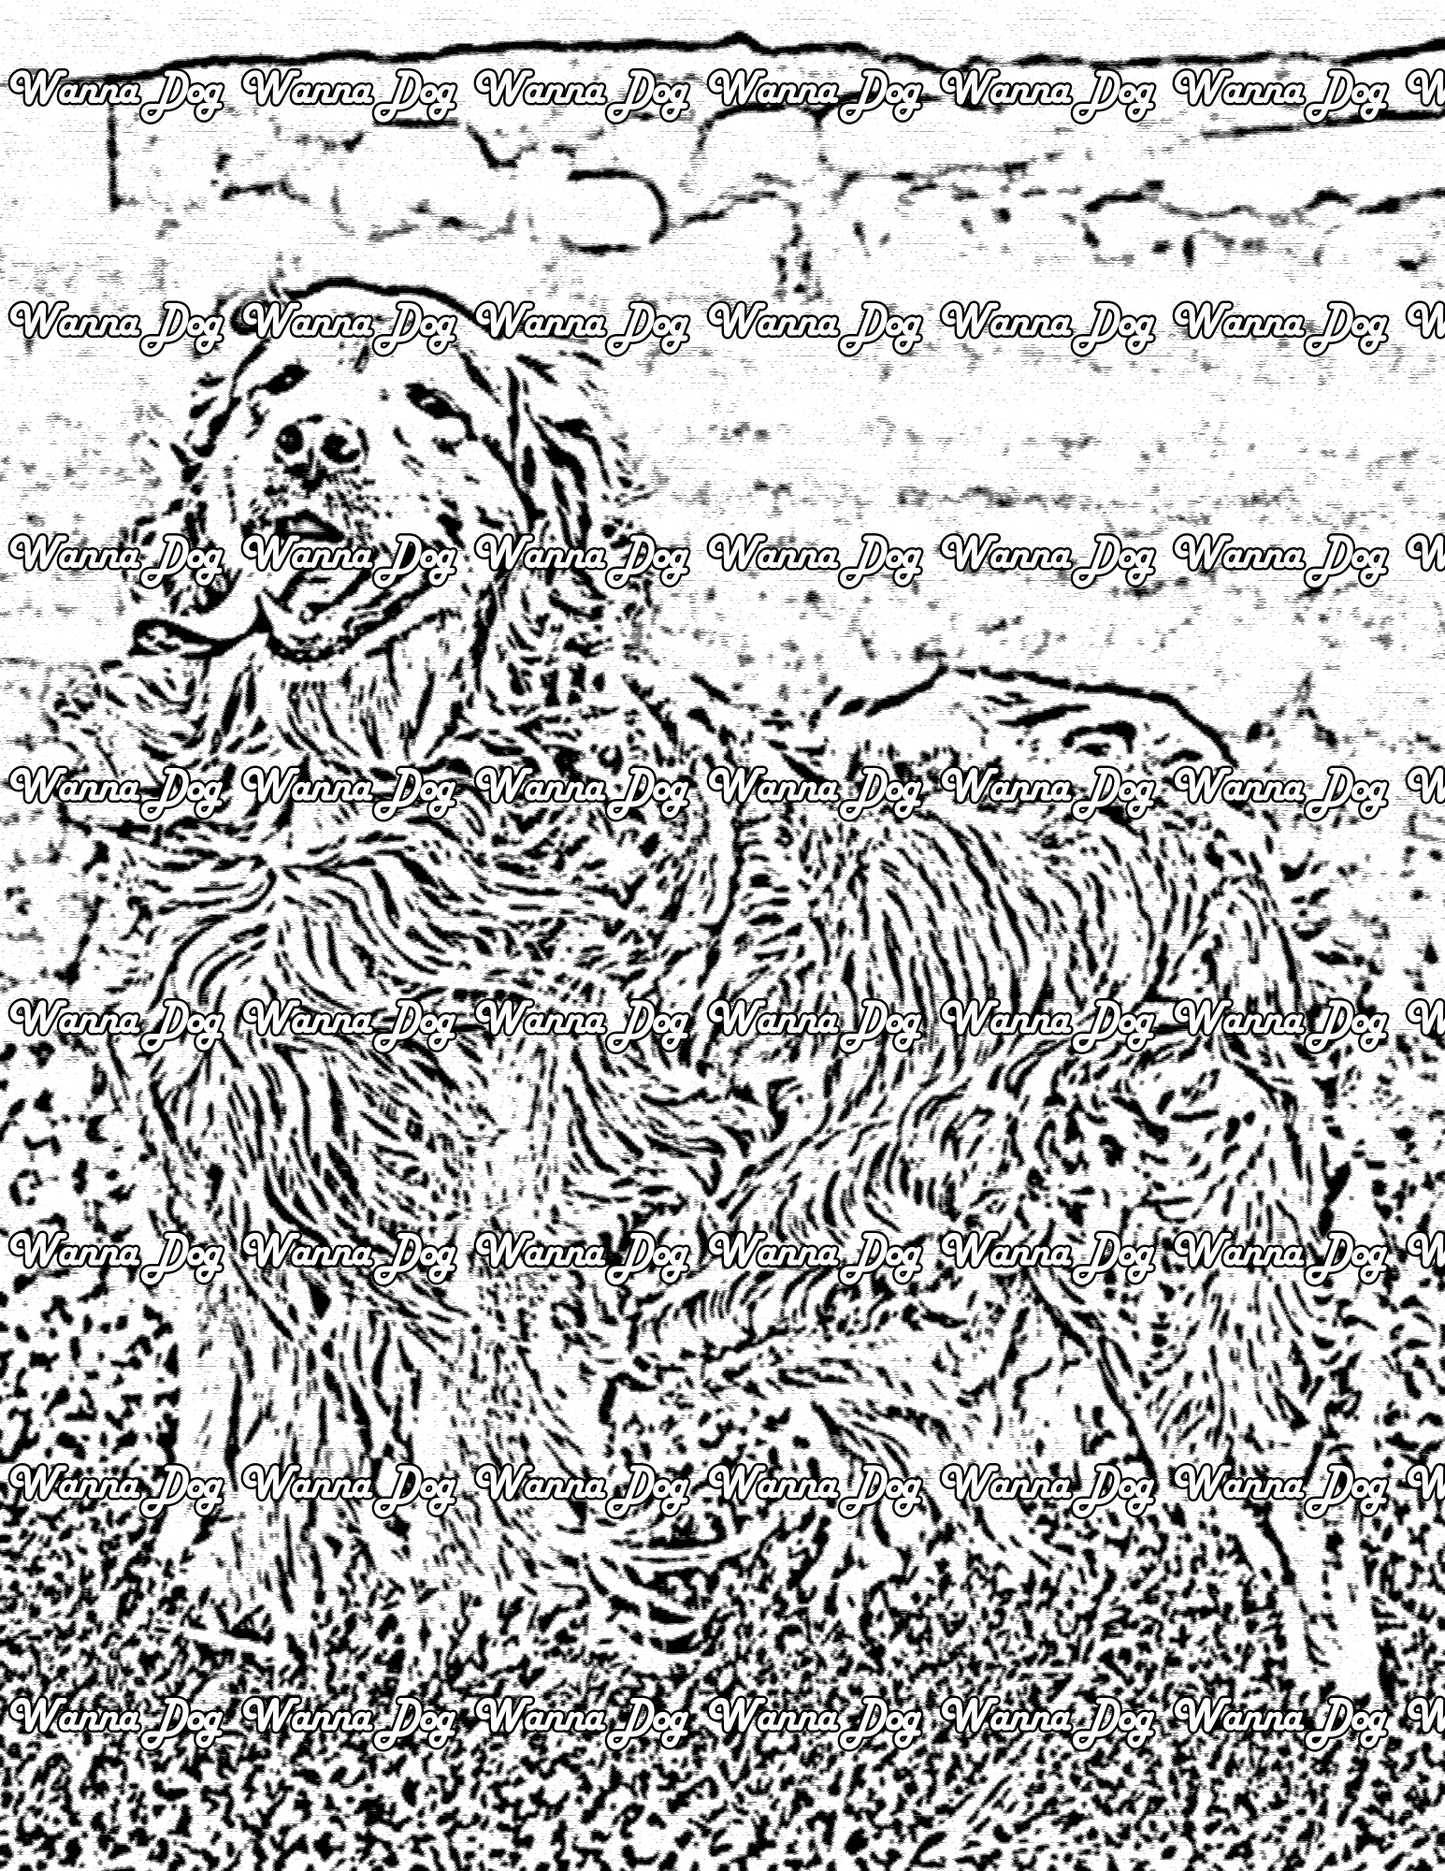 Golden Retriever Coloring Page of a Golden Retriever in a field with their tongue out